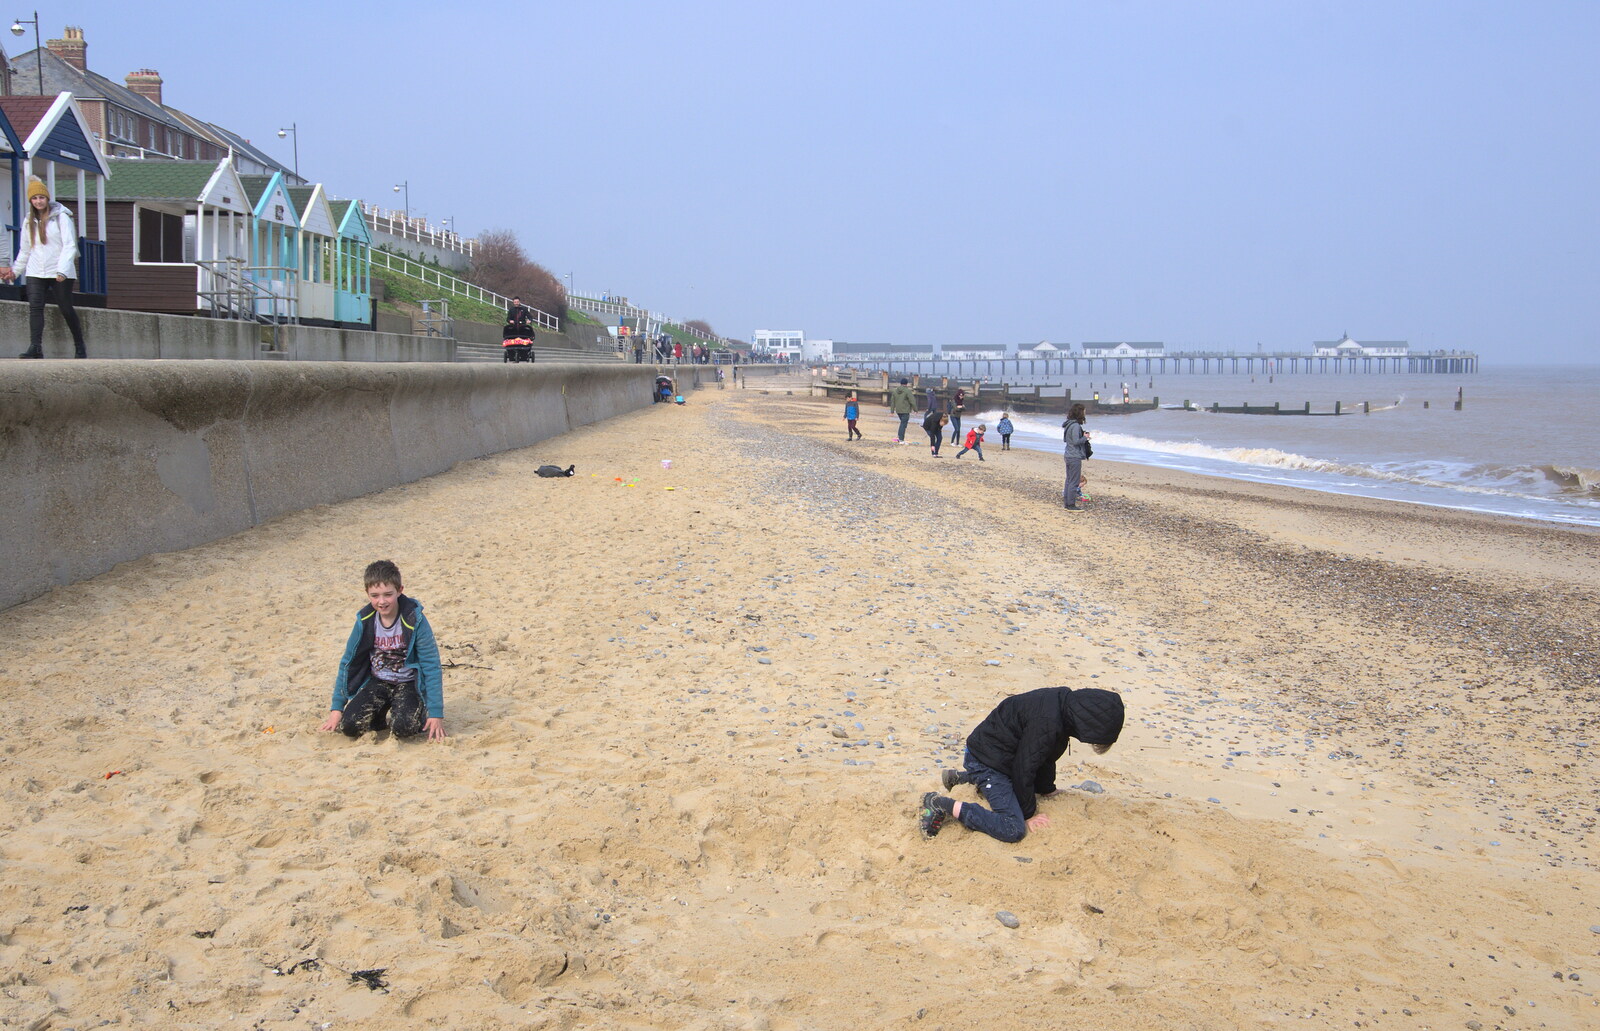 Harry digs in the sand from On The Beach, Southwold, Suffolk - 7th April 2019